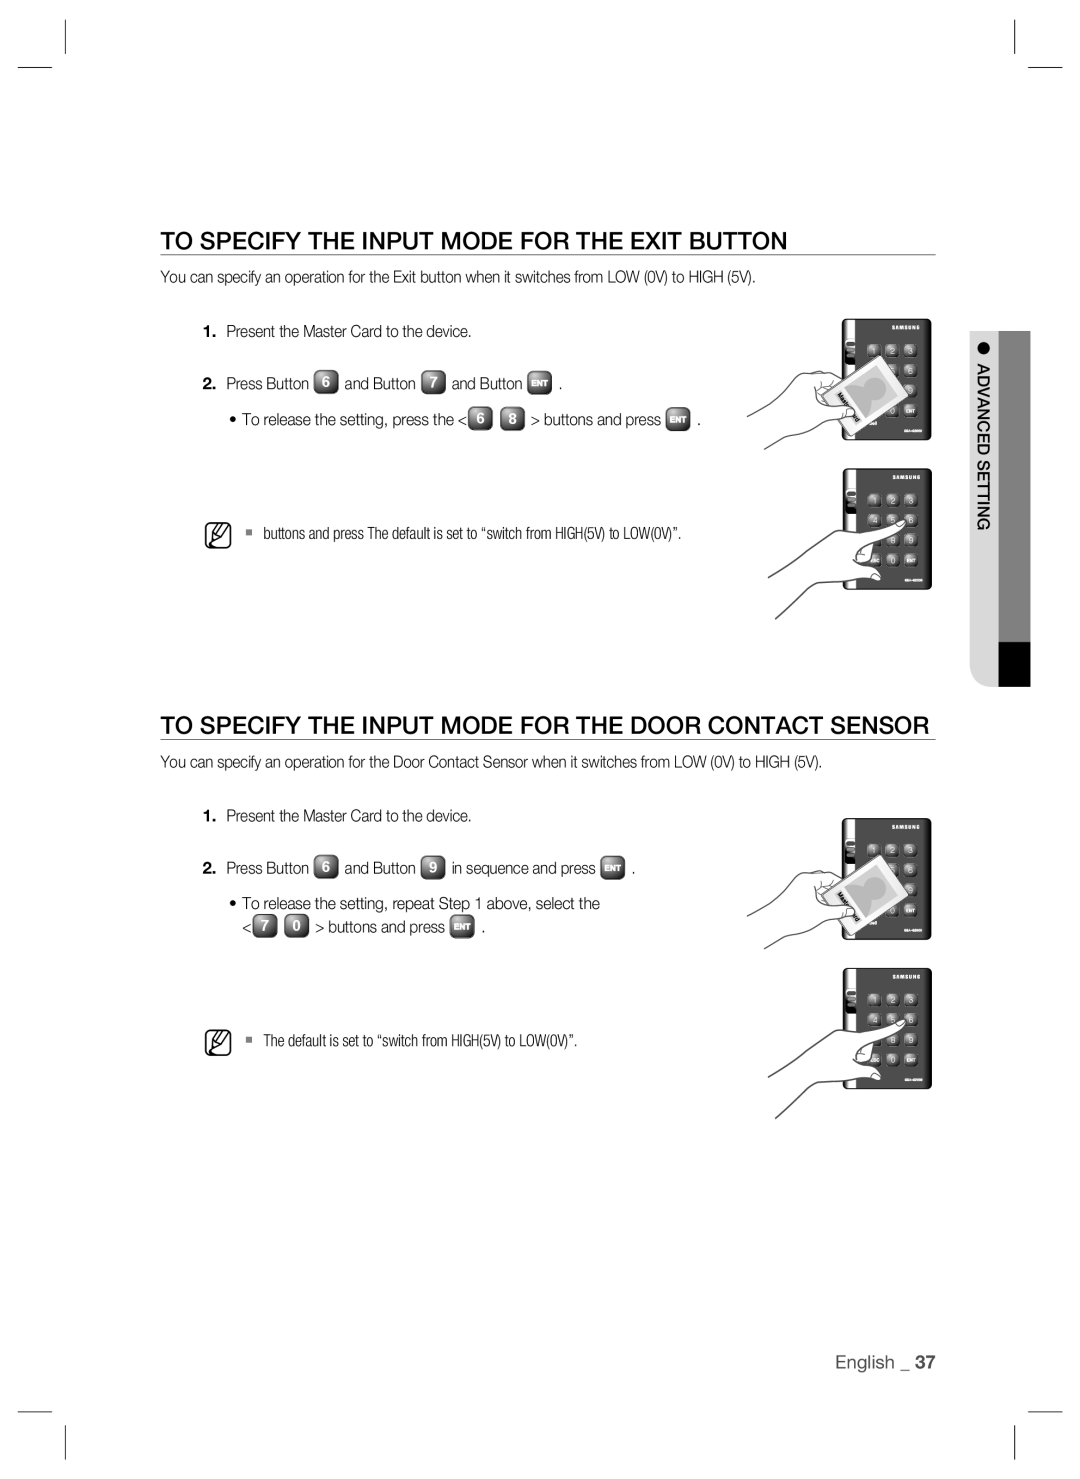 Samsung SSA-S2000W user manual To Specify The Input Mode For The Exit Button, English _ 